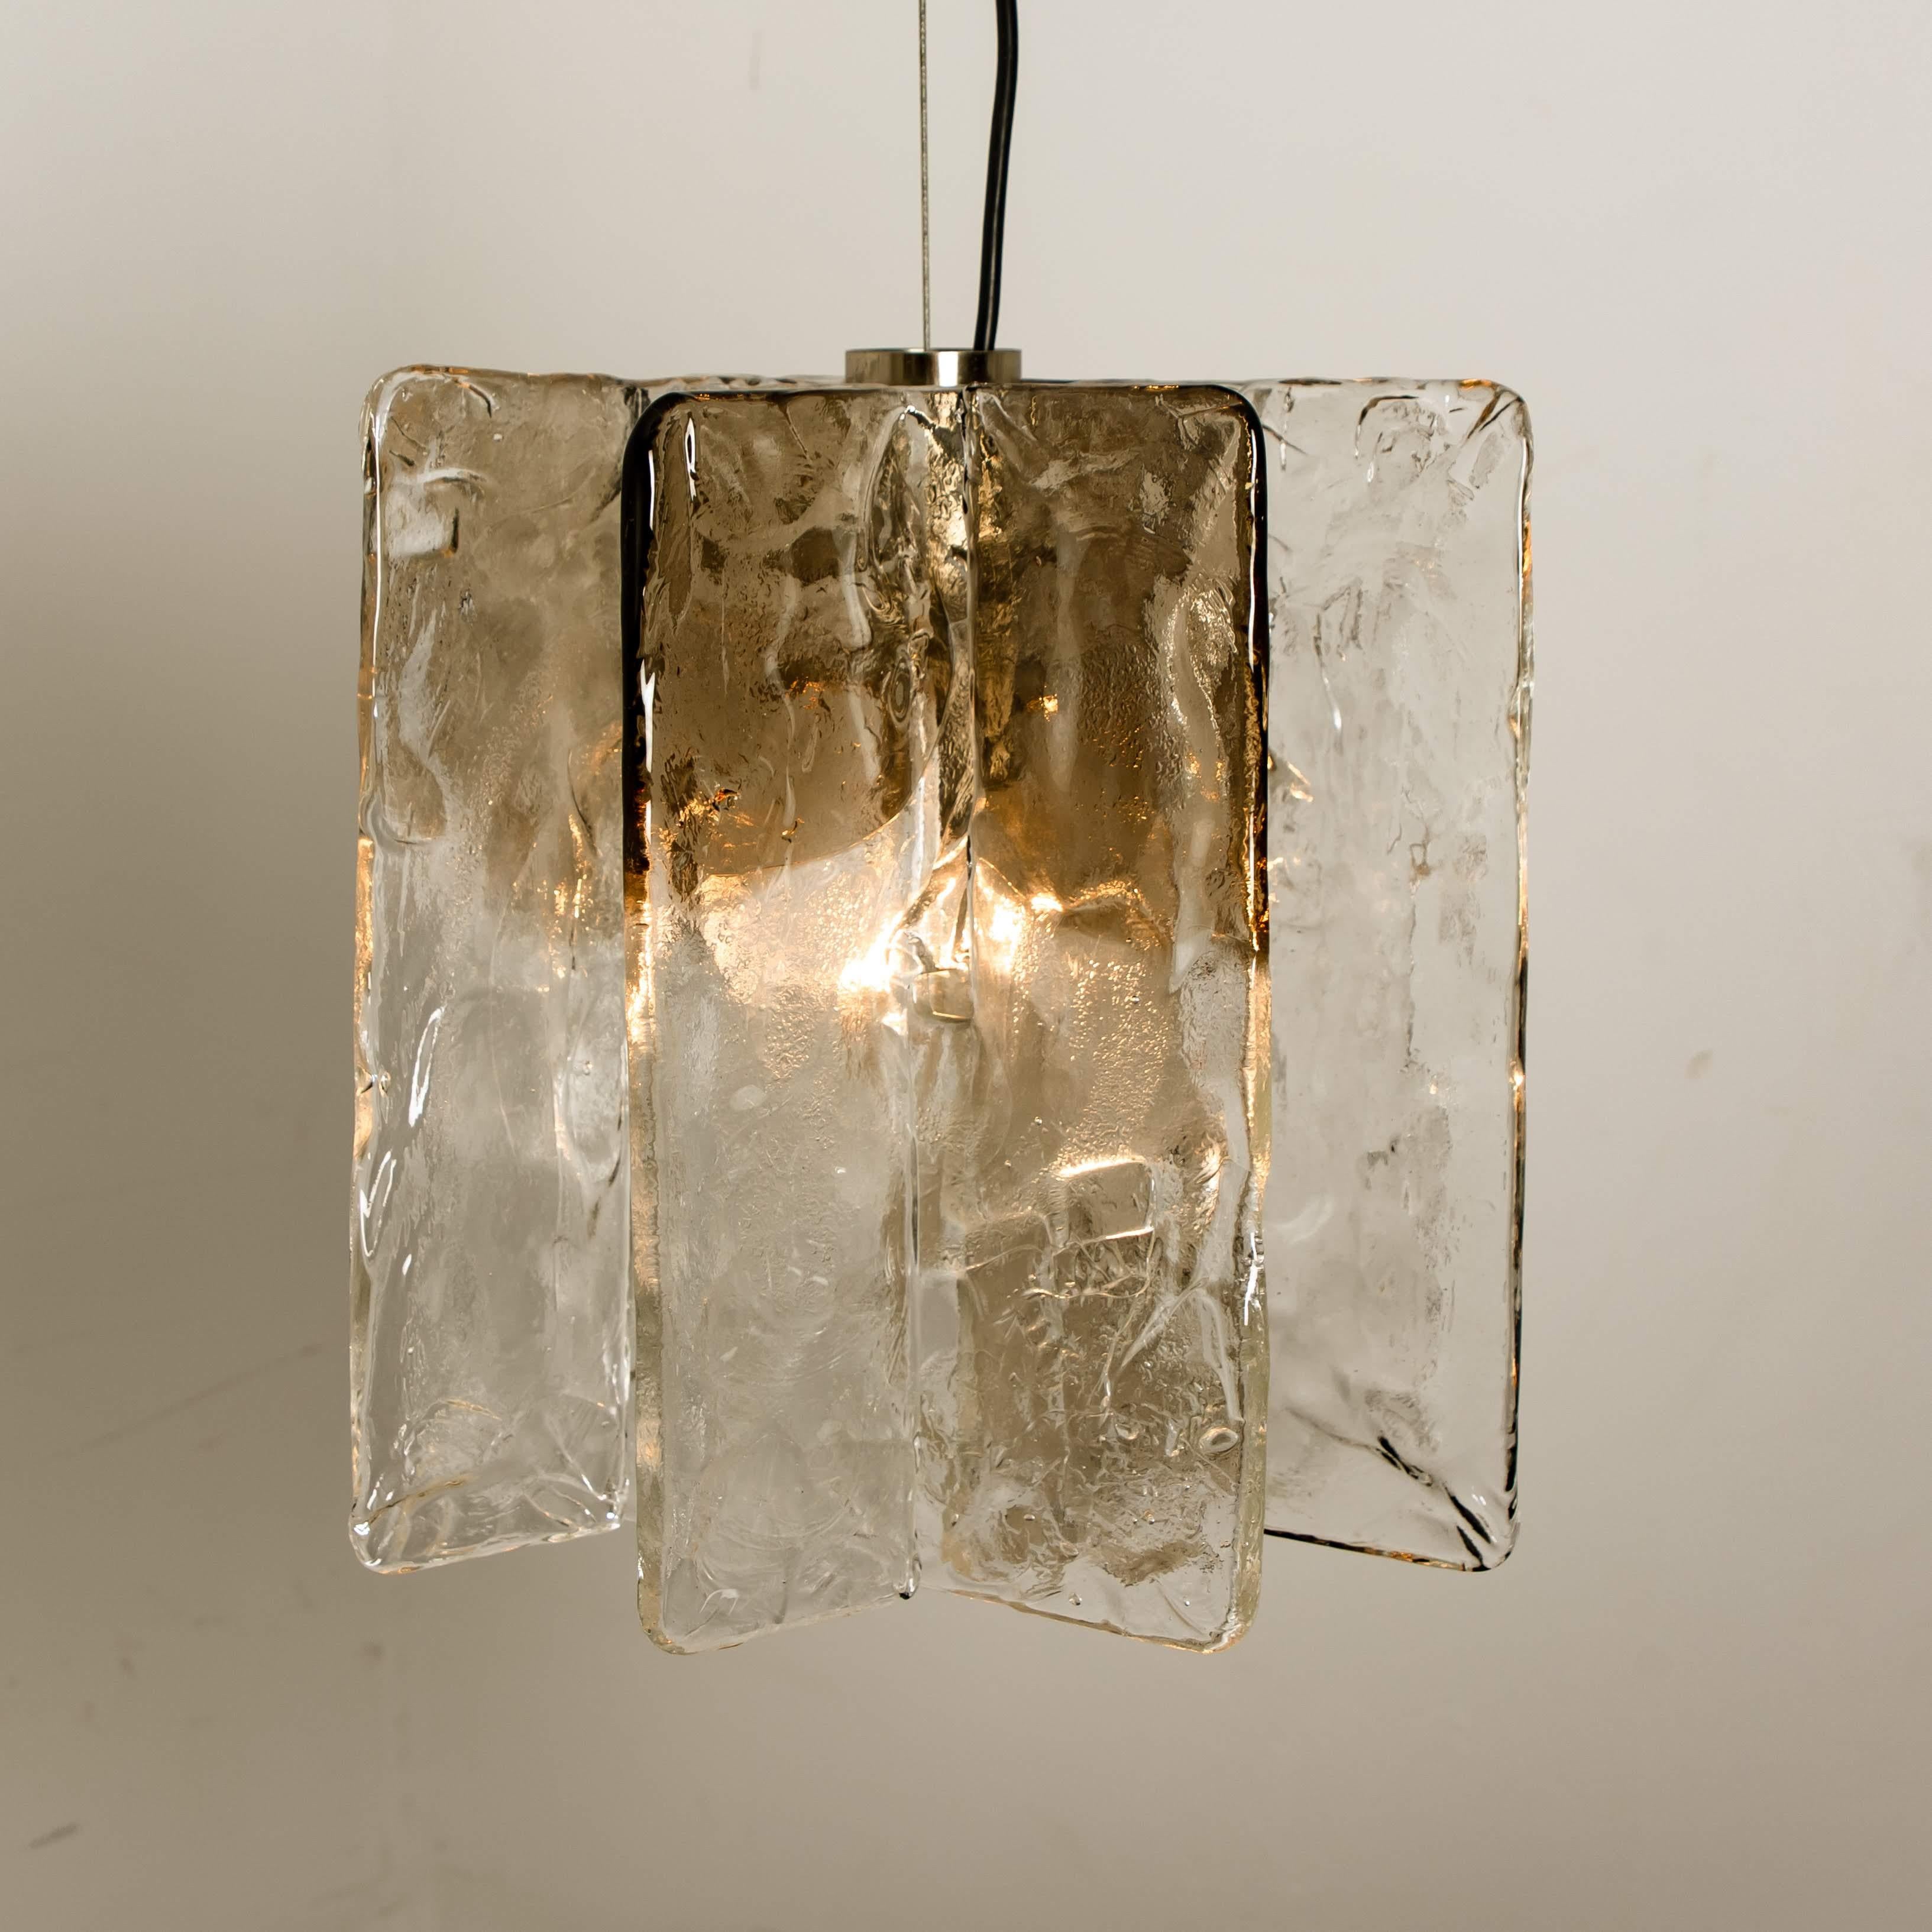 Chandelier by Carlo Nason for Mazzega, 1970s. The light consists of four 0.5 cm thick glass plates in clear and smoked glass, which are mounted on a nickel-plated base. It has an E27 socket (max 80 Watt).

Heavy quality and in perfect condition.